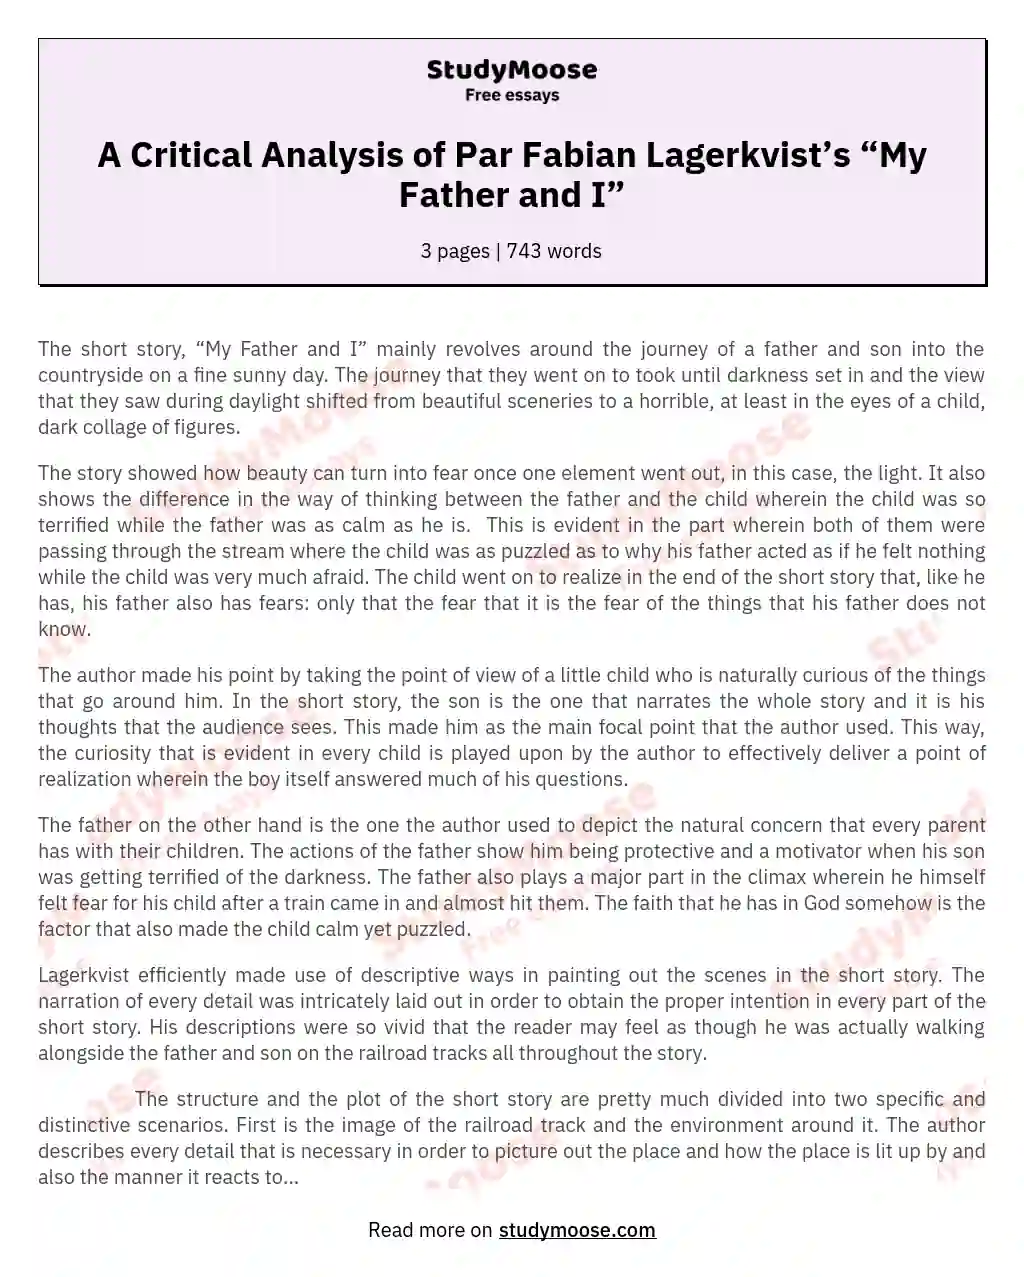 A Critical Analysis of Par Fabian Lagerkvist’s “My Father and I” essay